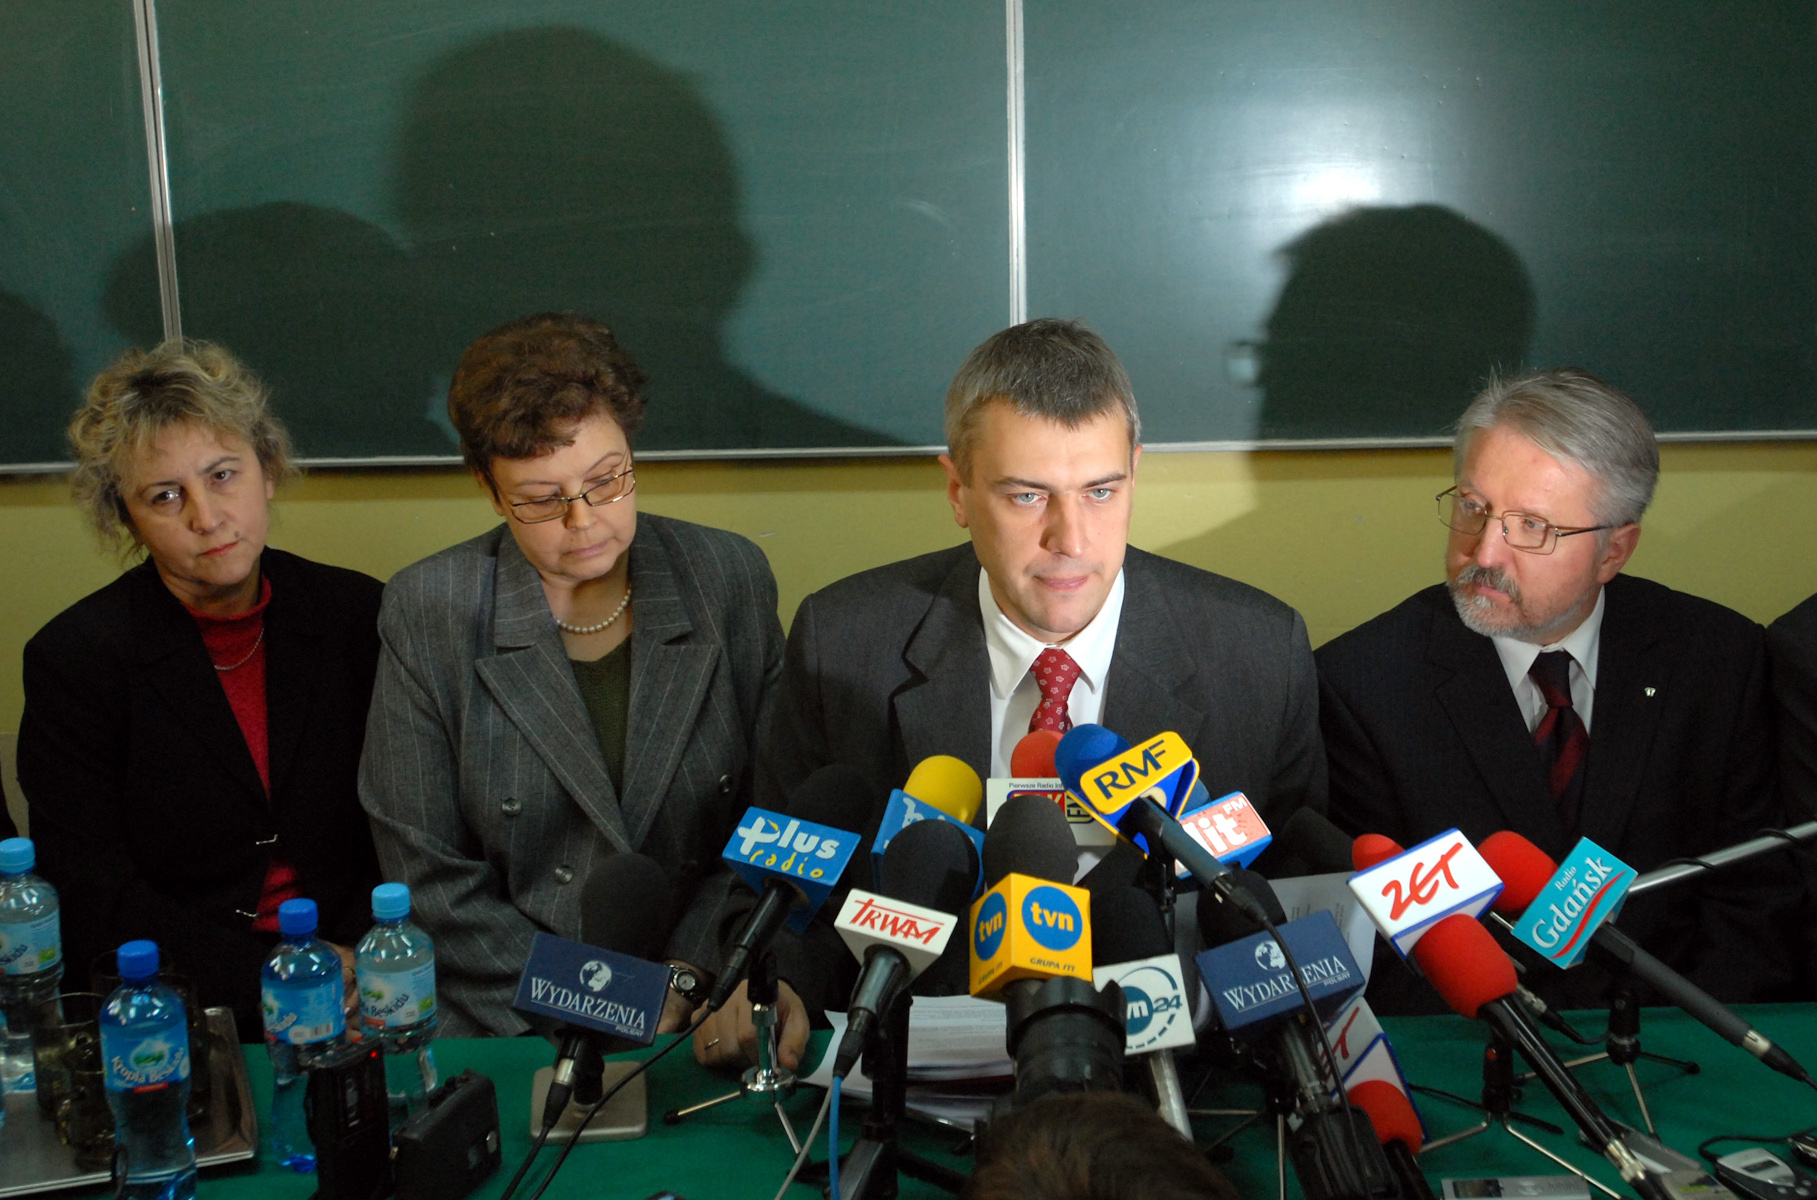 Minister of Education Roman Giertych during a press conference in Gdansk.